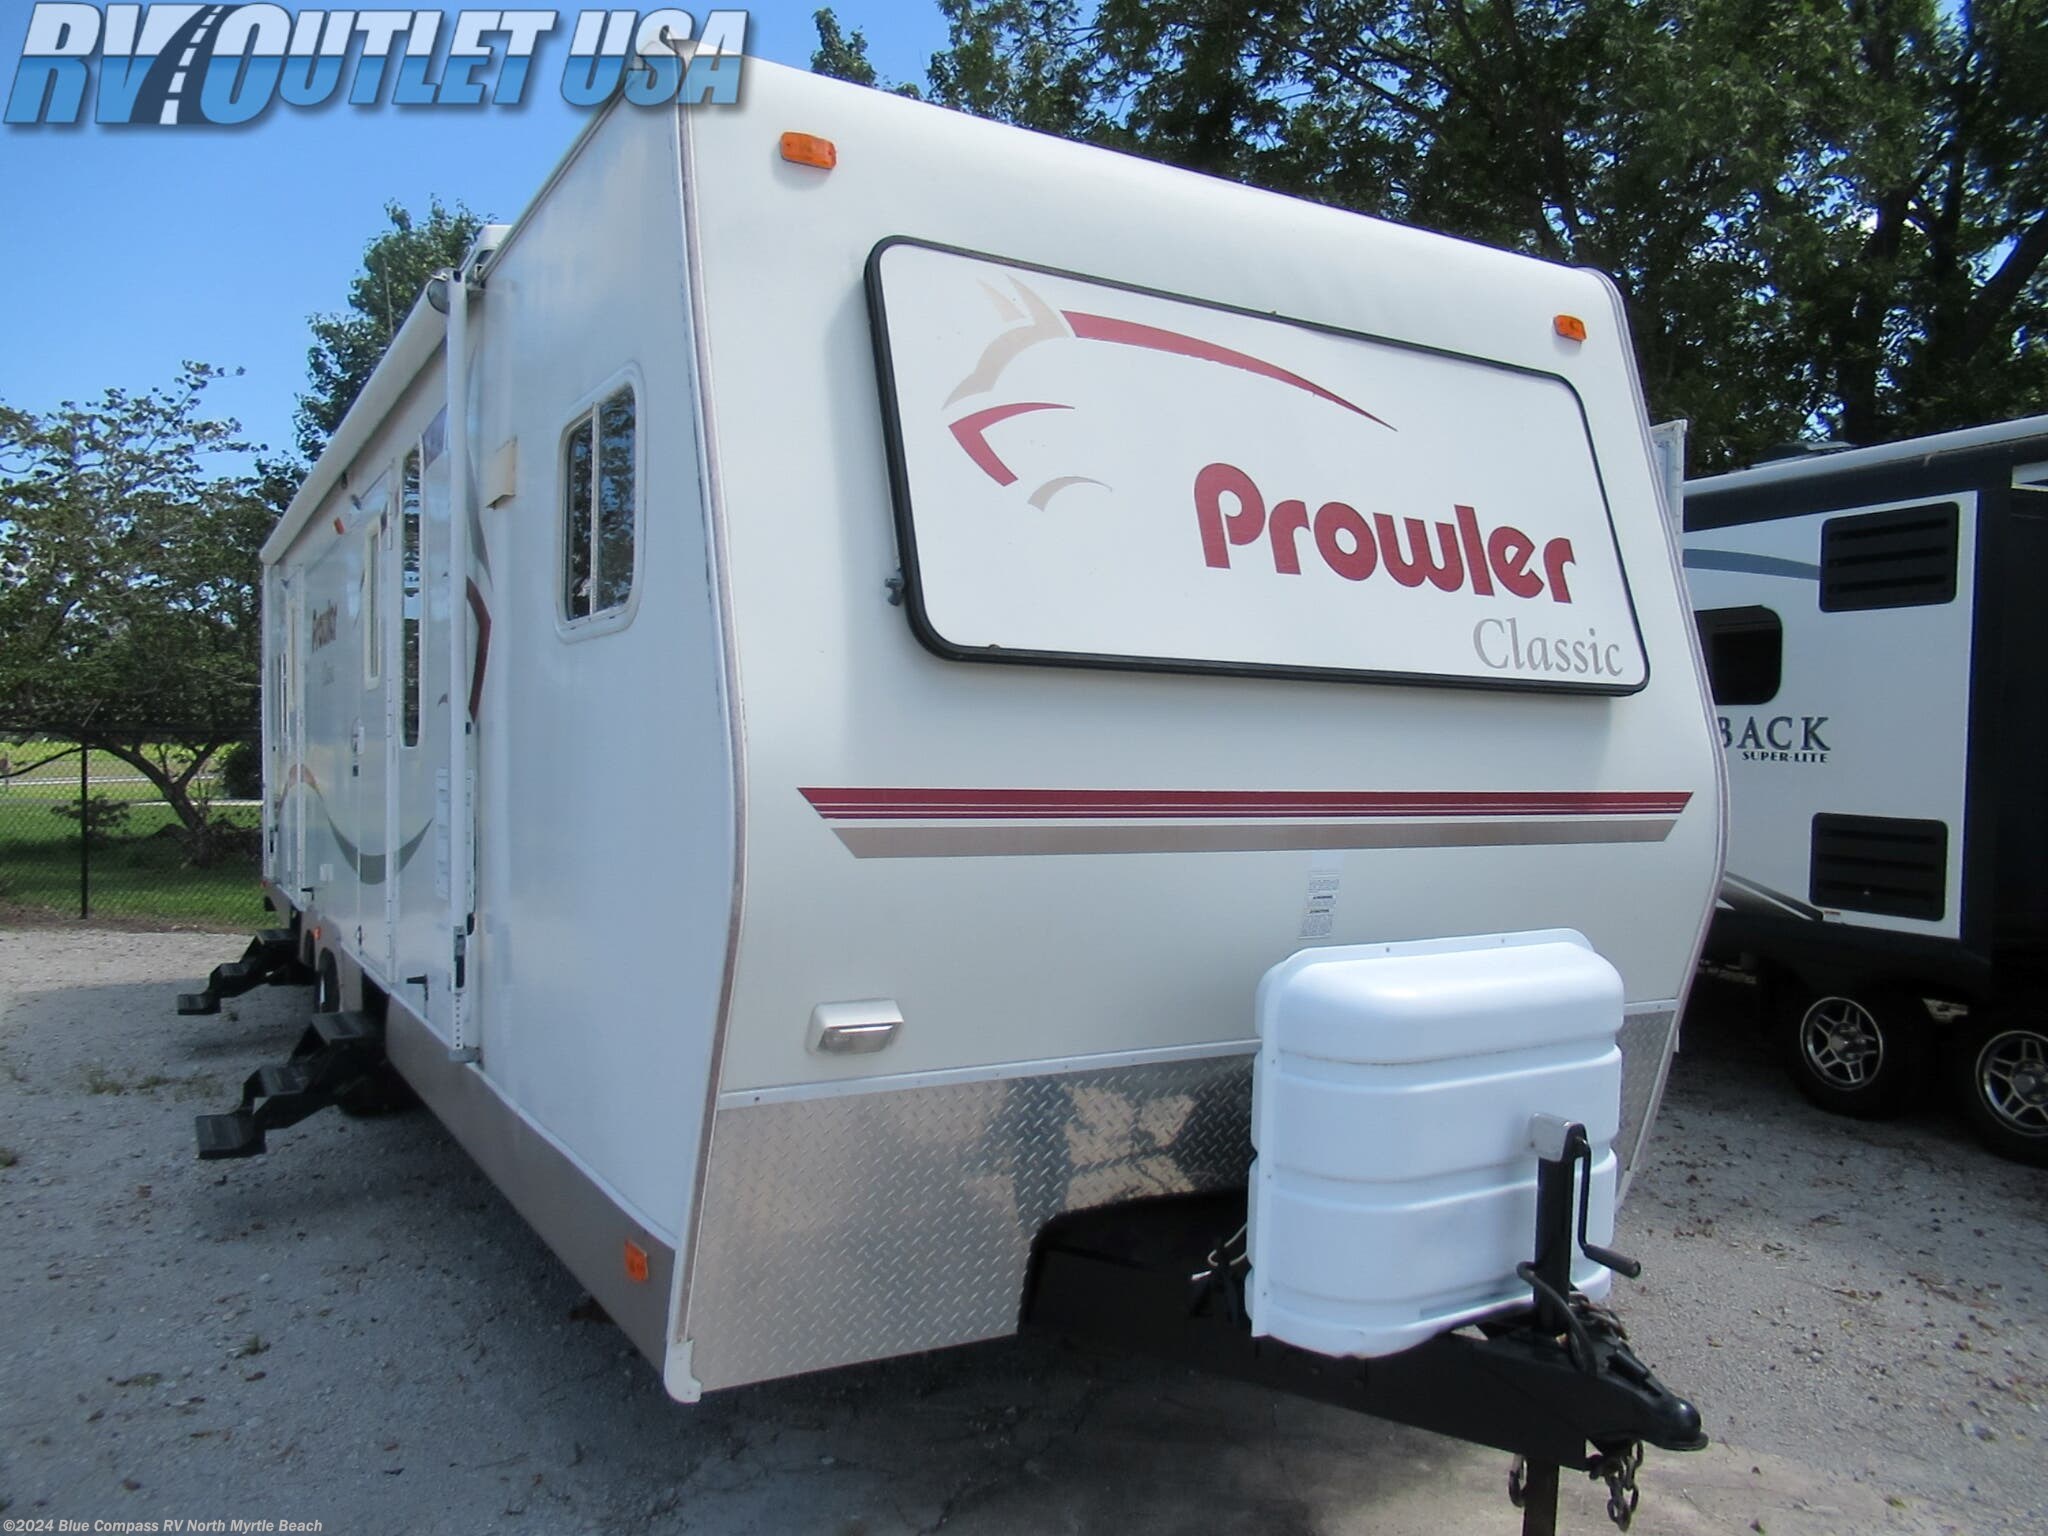 2007 Prowler Travel Trailer For Sale 2007 Prowler Travel Trailer For Sale